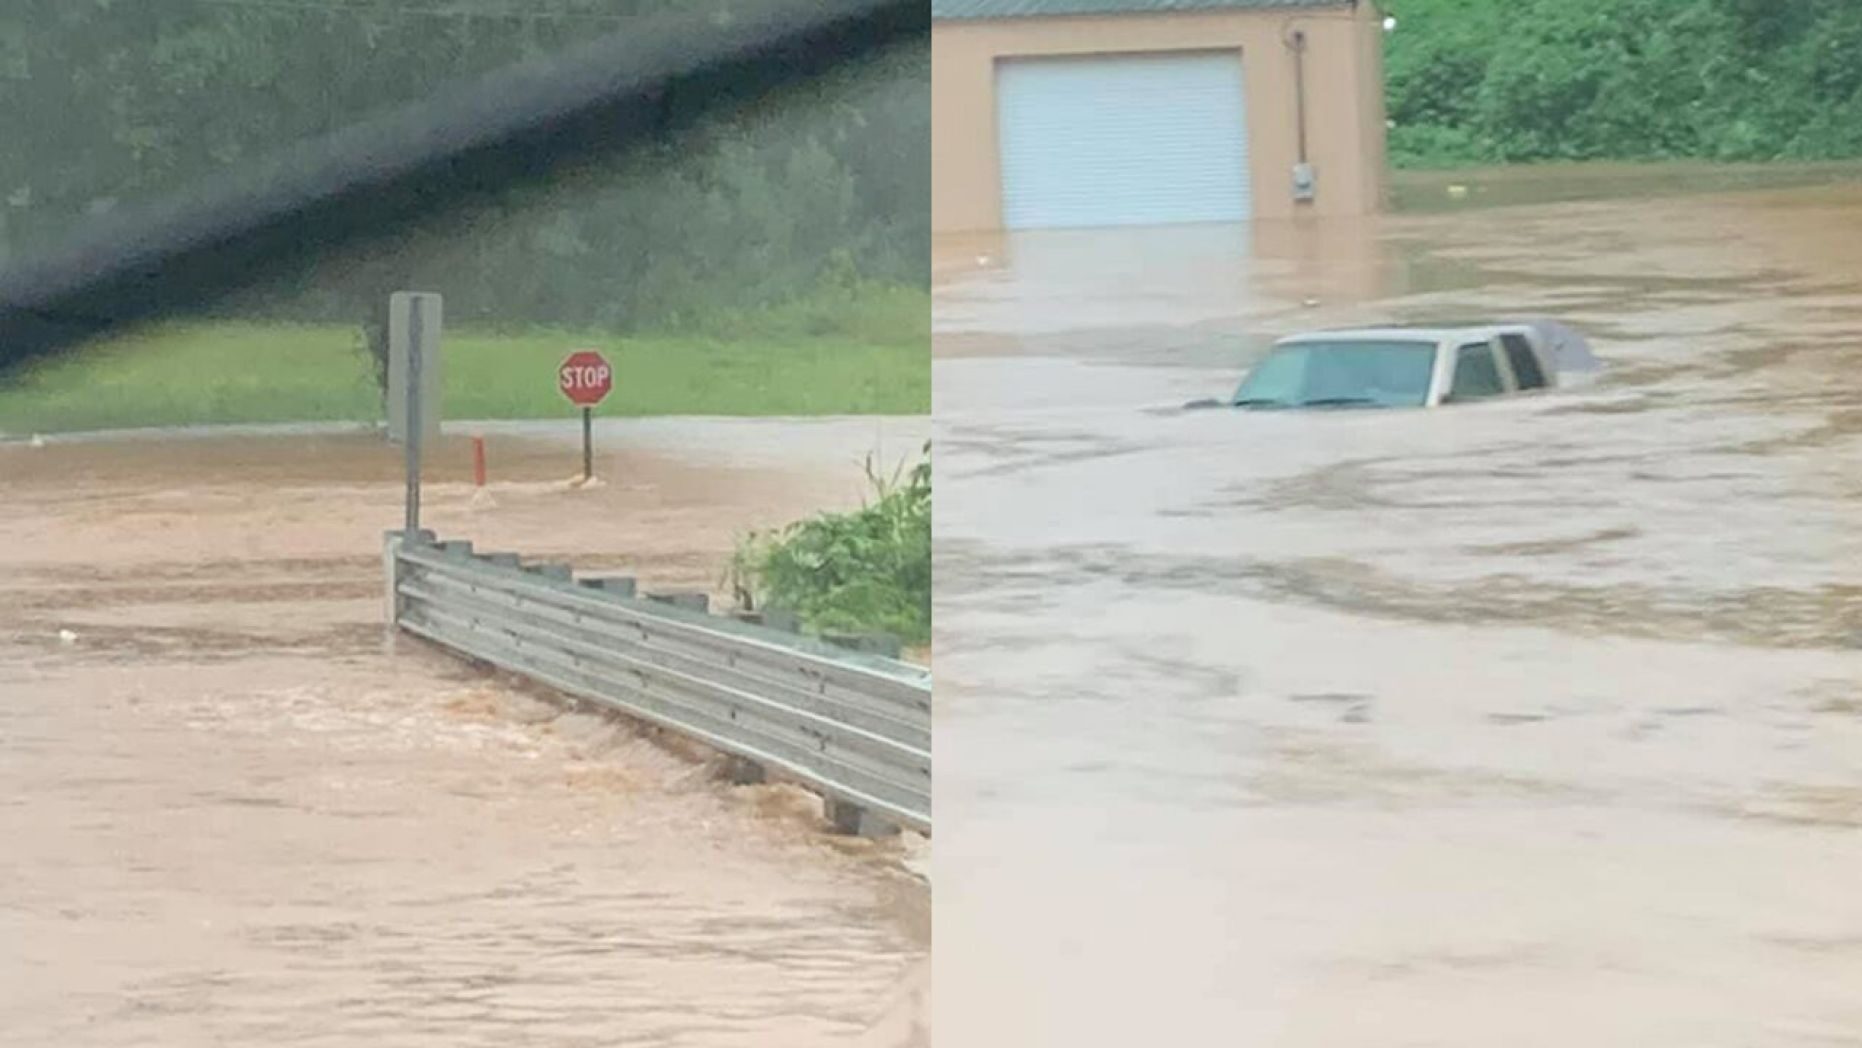 Floodwaters overtook roads and left some vehicles stranded on Wednesday as drenching storms pounded northern Mississippi.